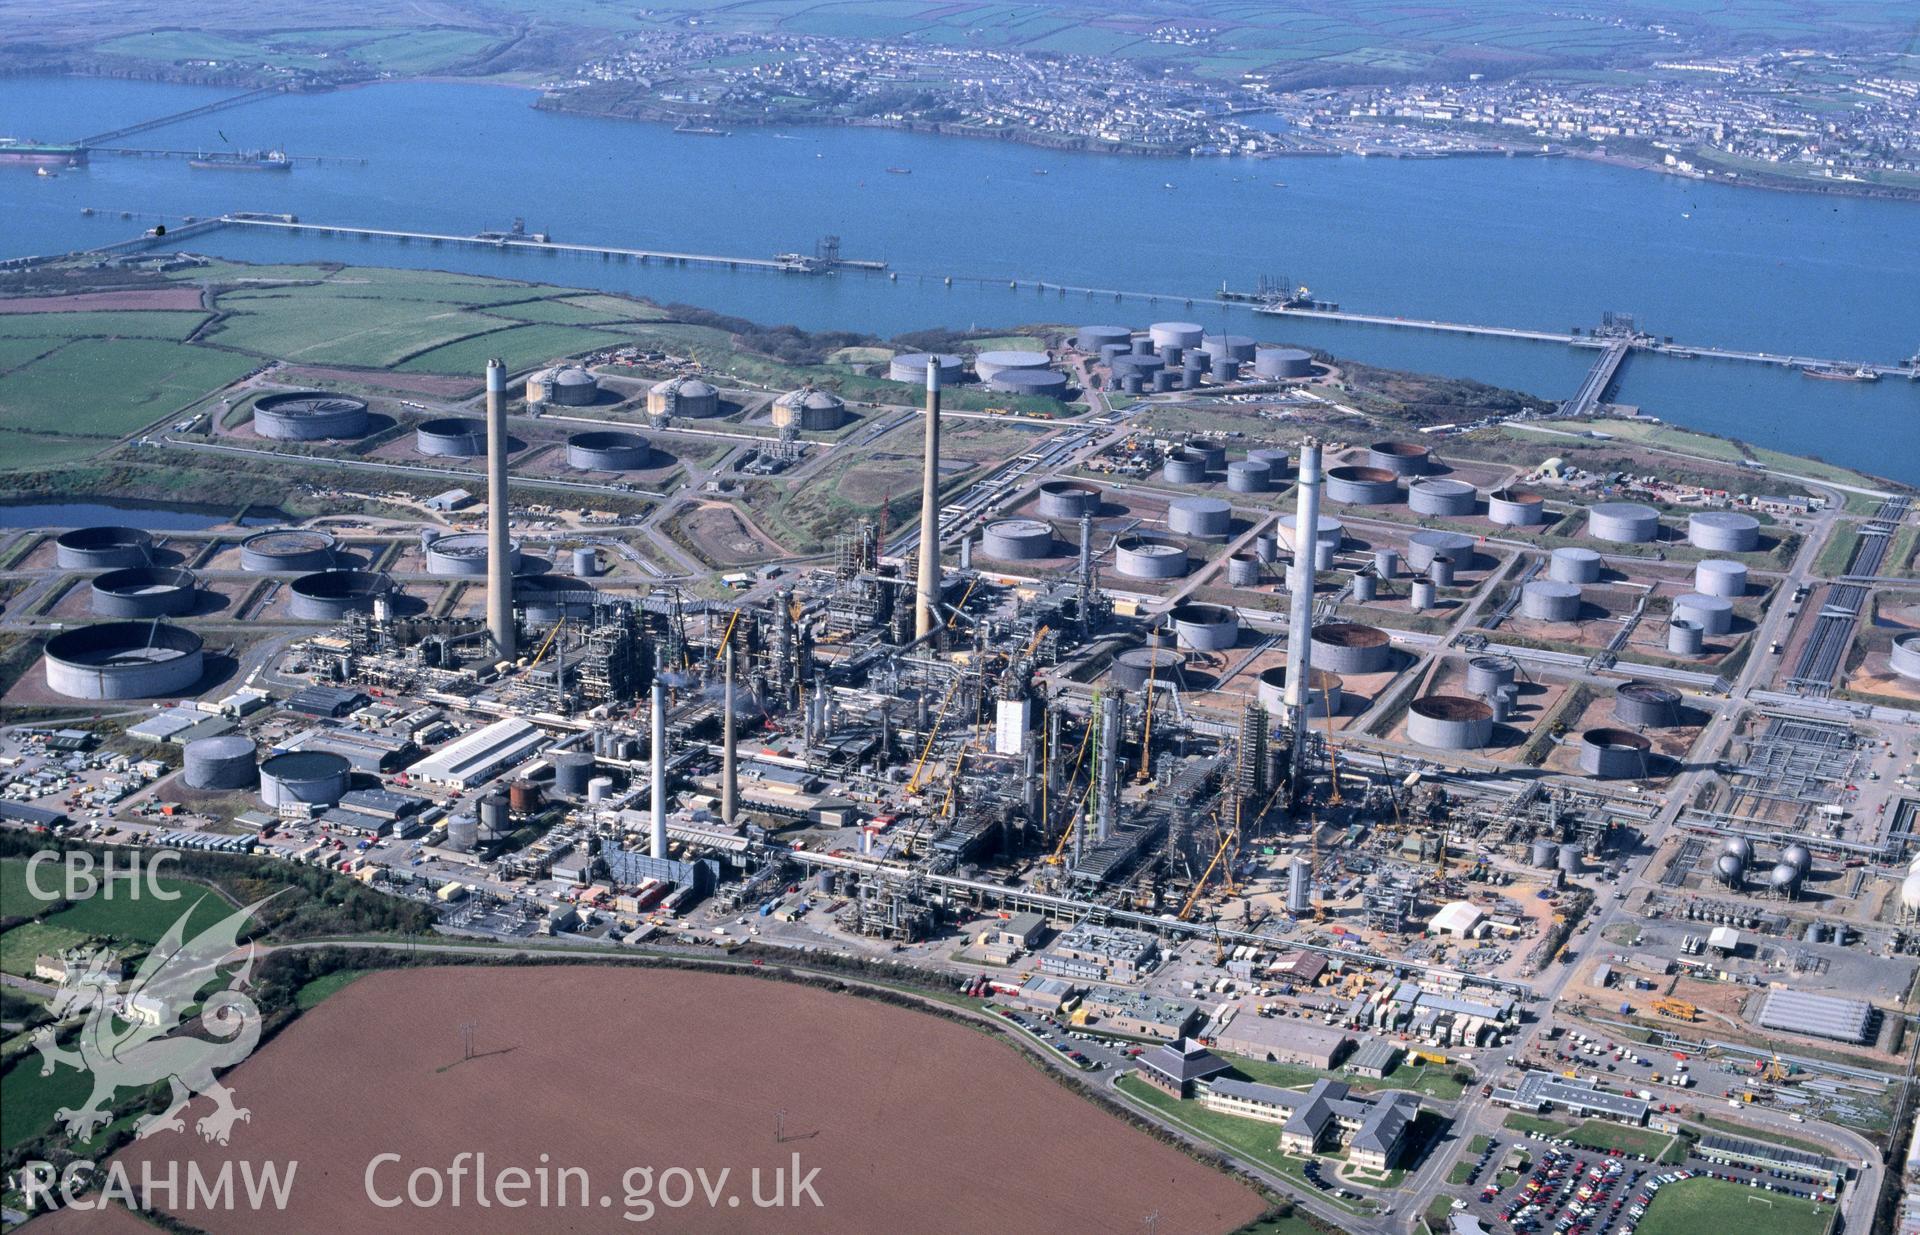 Slide of RCAHMW colour oblique aerial photograph of Rhoscrowther Oil Refinery, taken by C.R. Musson, 13/4/1995.